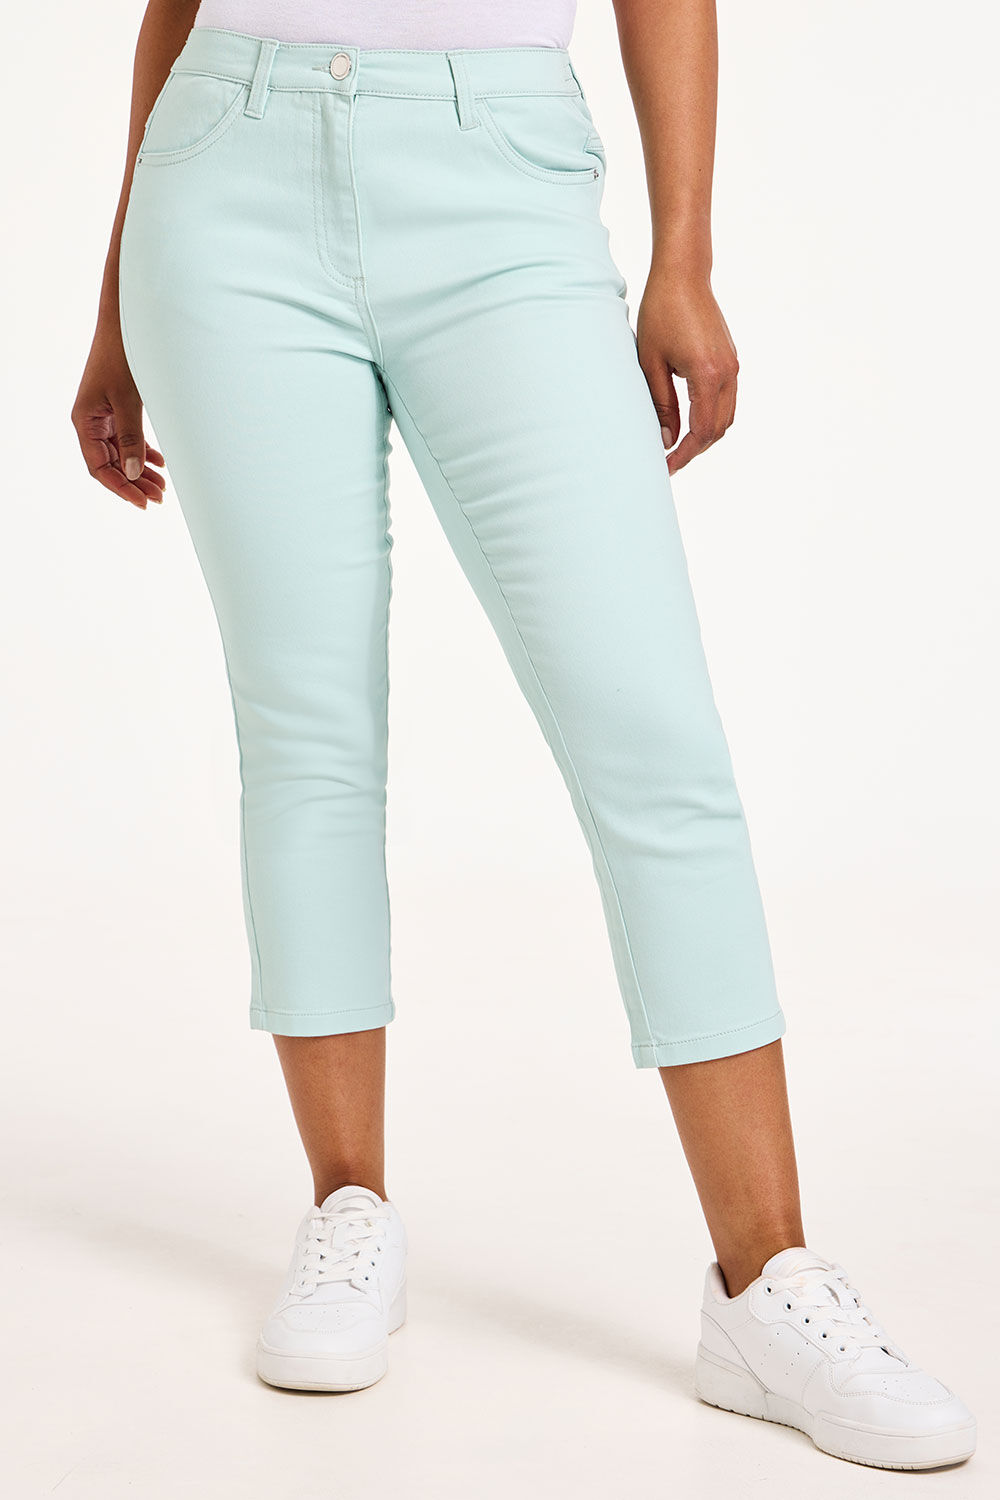 Bonmarche Mint The Sara Coloured Cropped Jeans, Size: 28